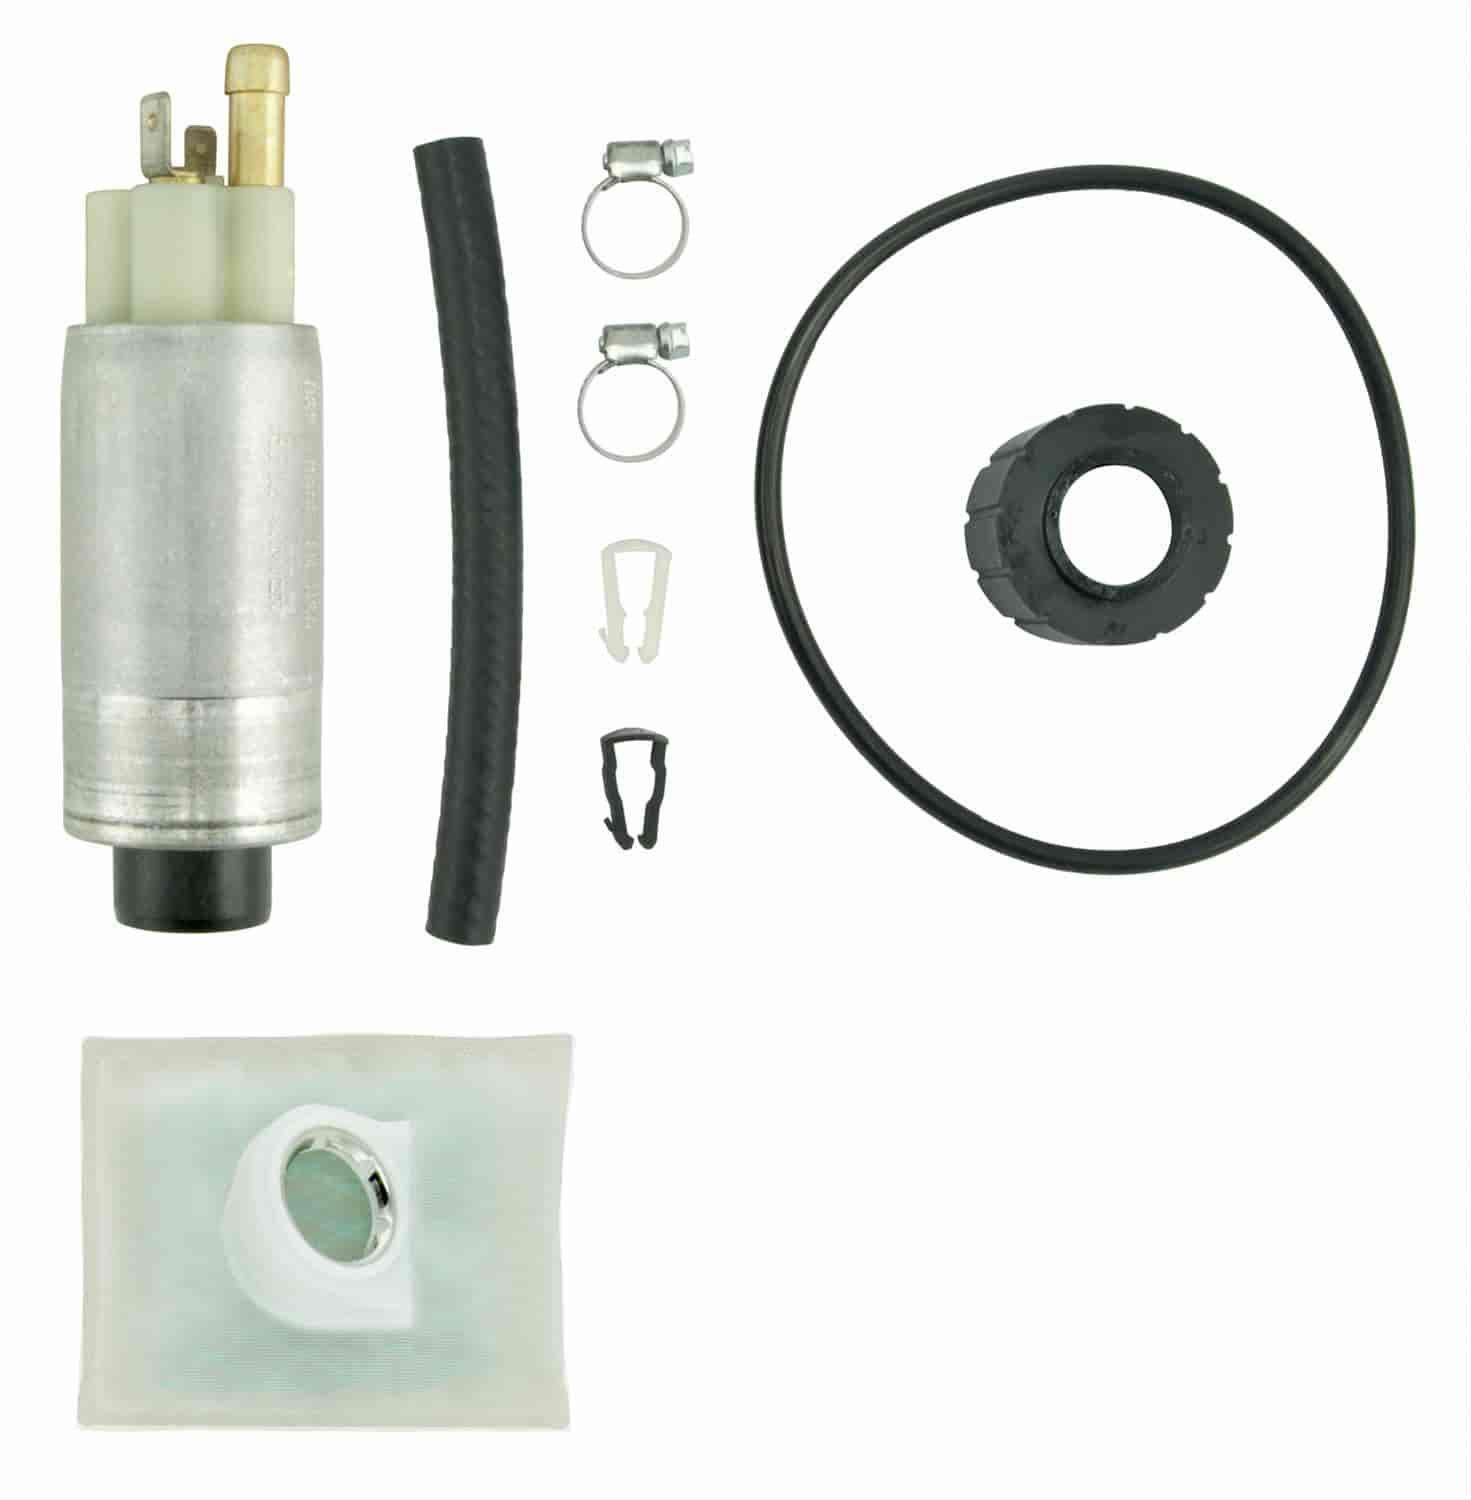 EFI In-Tank Electric Fuel Pump And Strainer Set for 1988-1997 Ford Lincoln Mercury